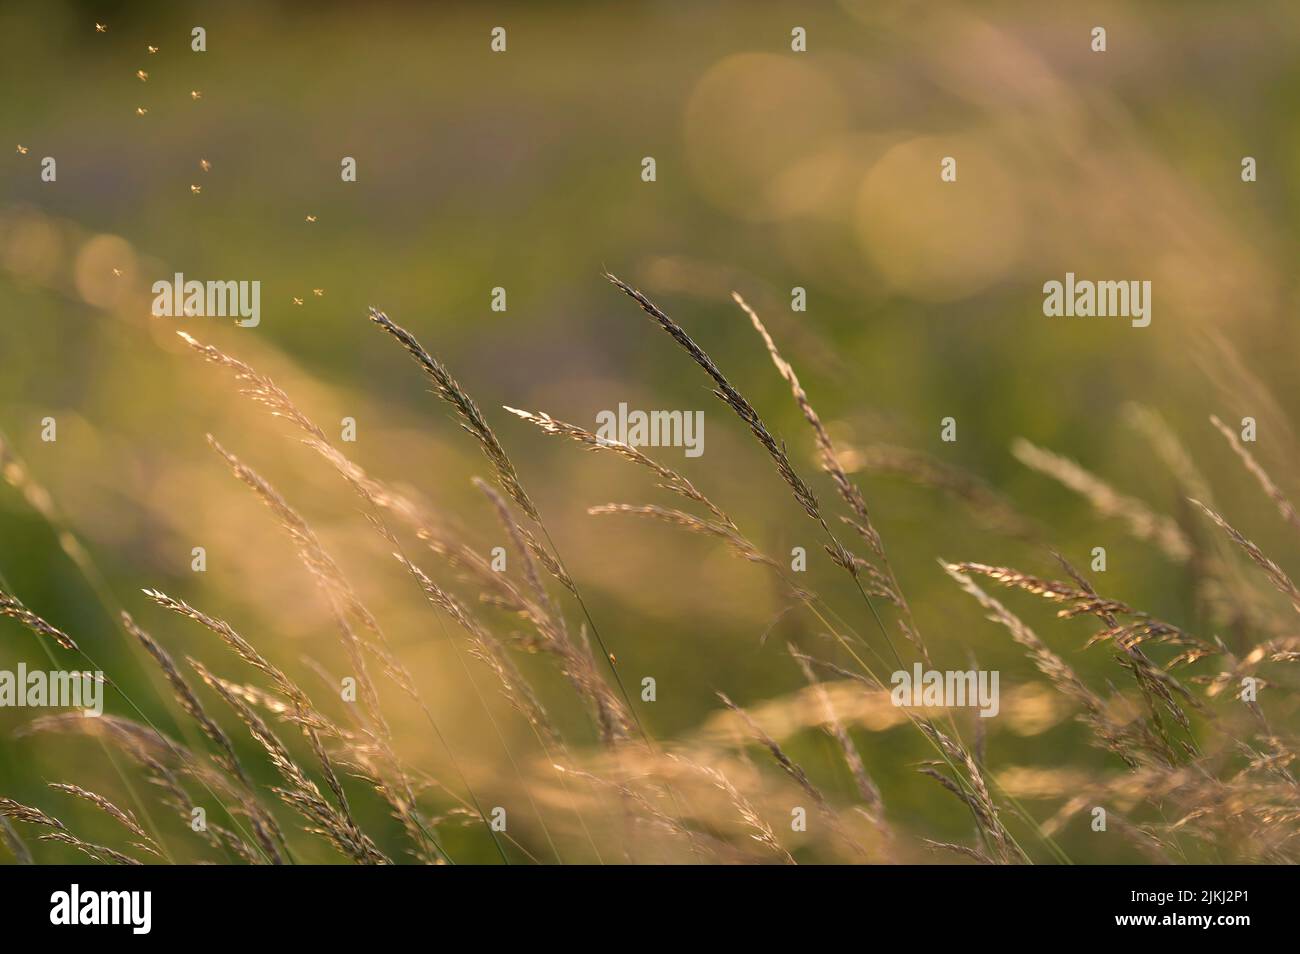 Grasses shine in evening light, Germany Stock Photo